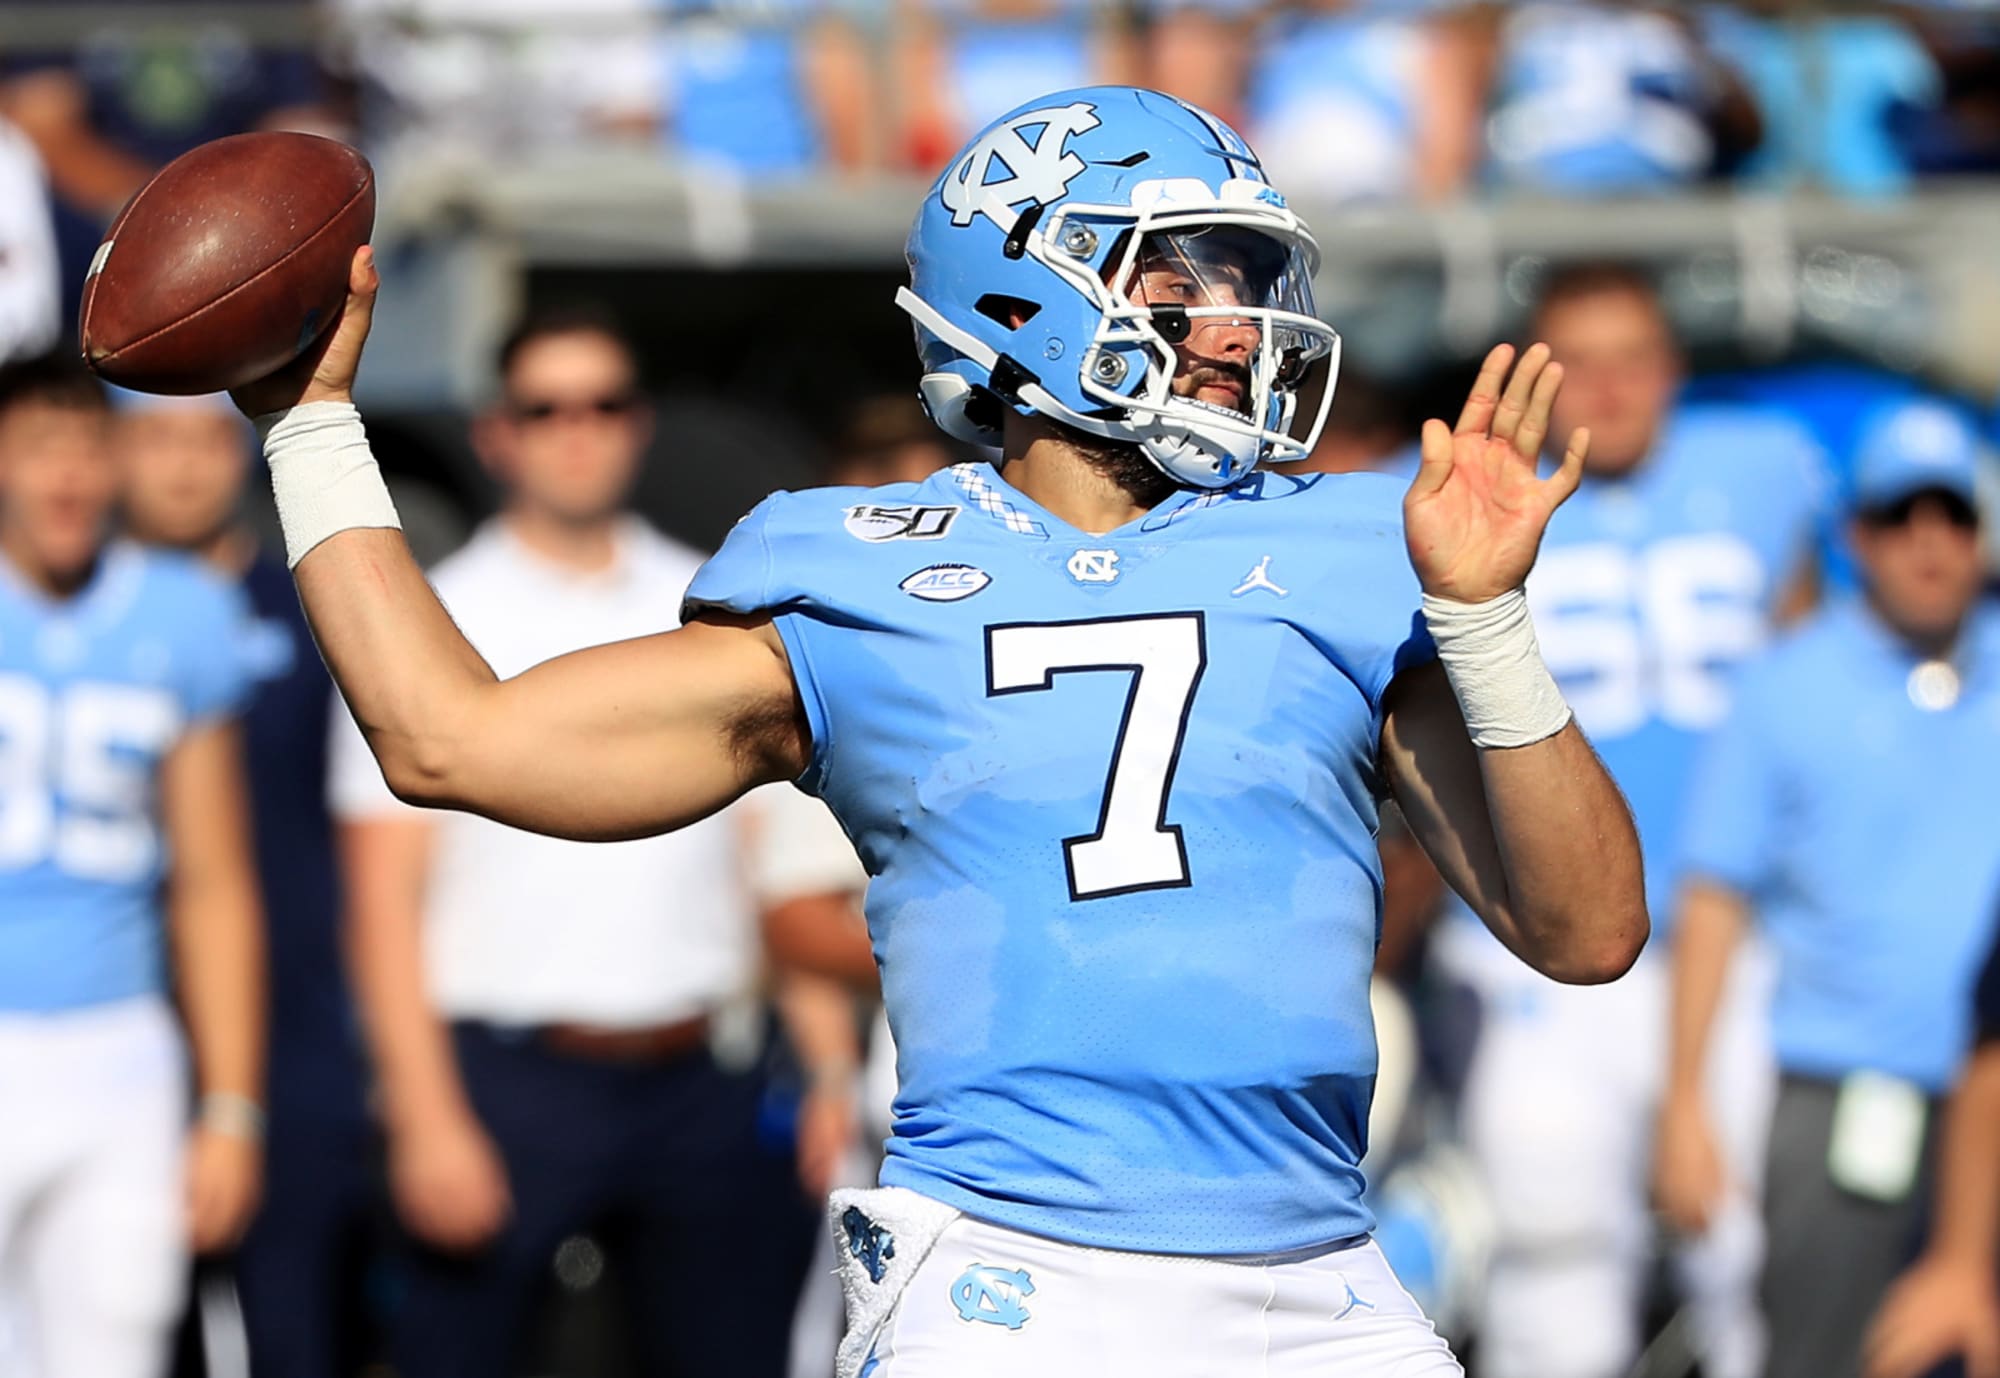 UNC Football vs. Syracuse Game info, preview, prediction and more